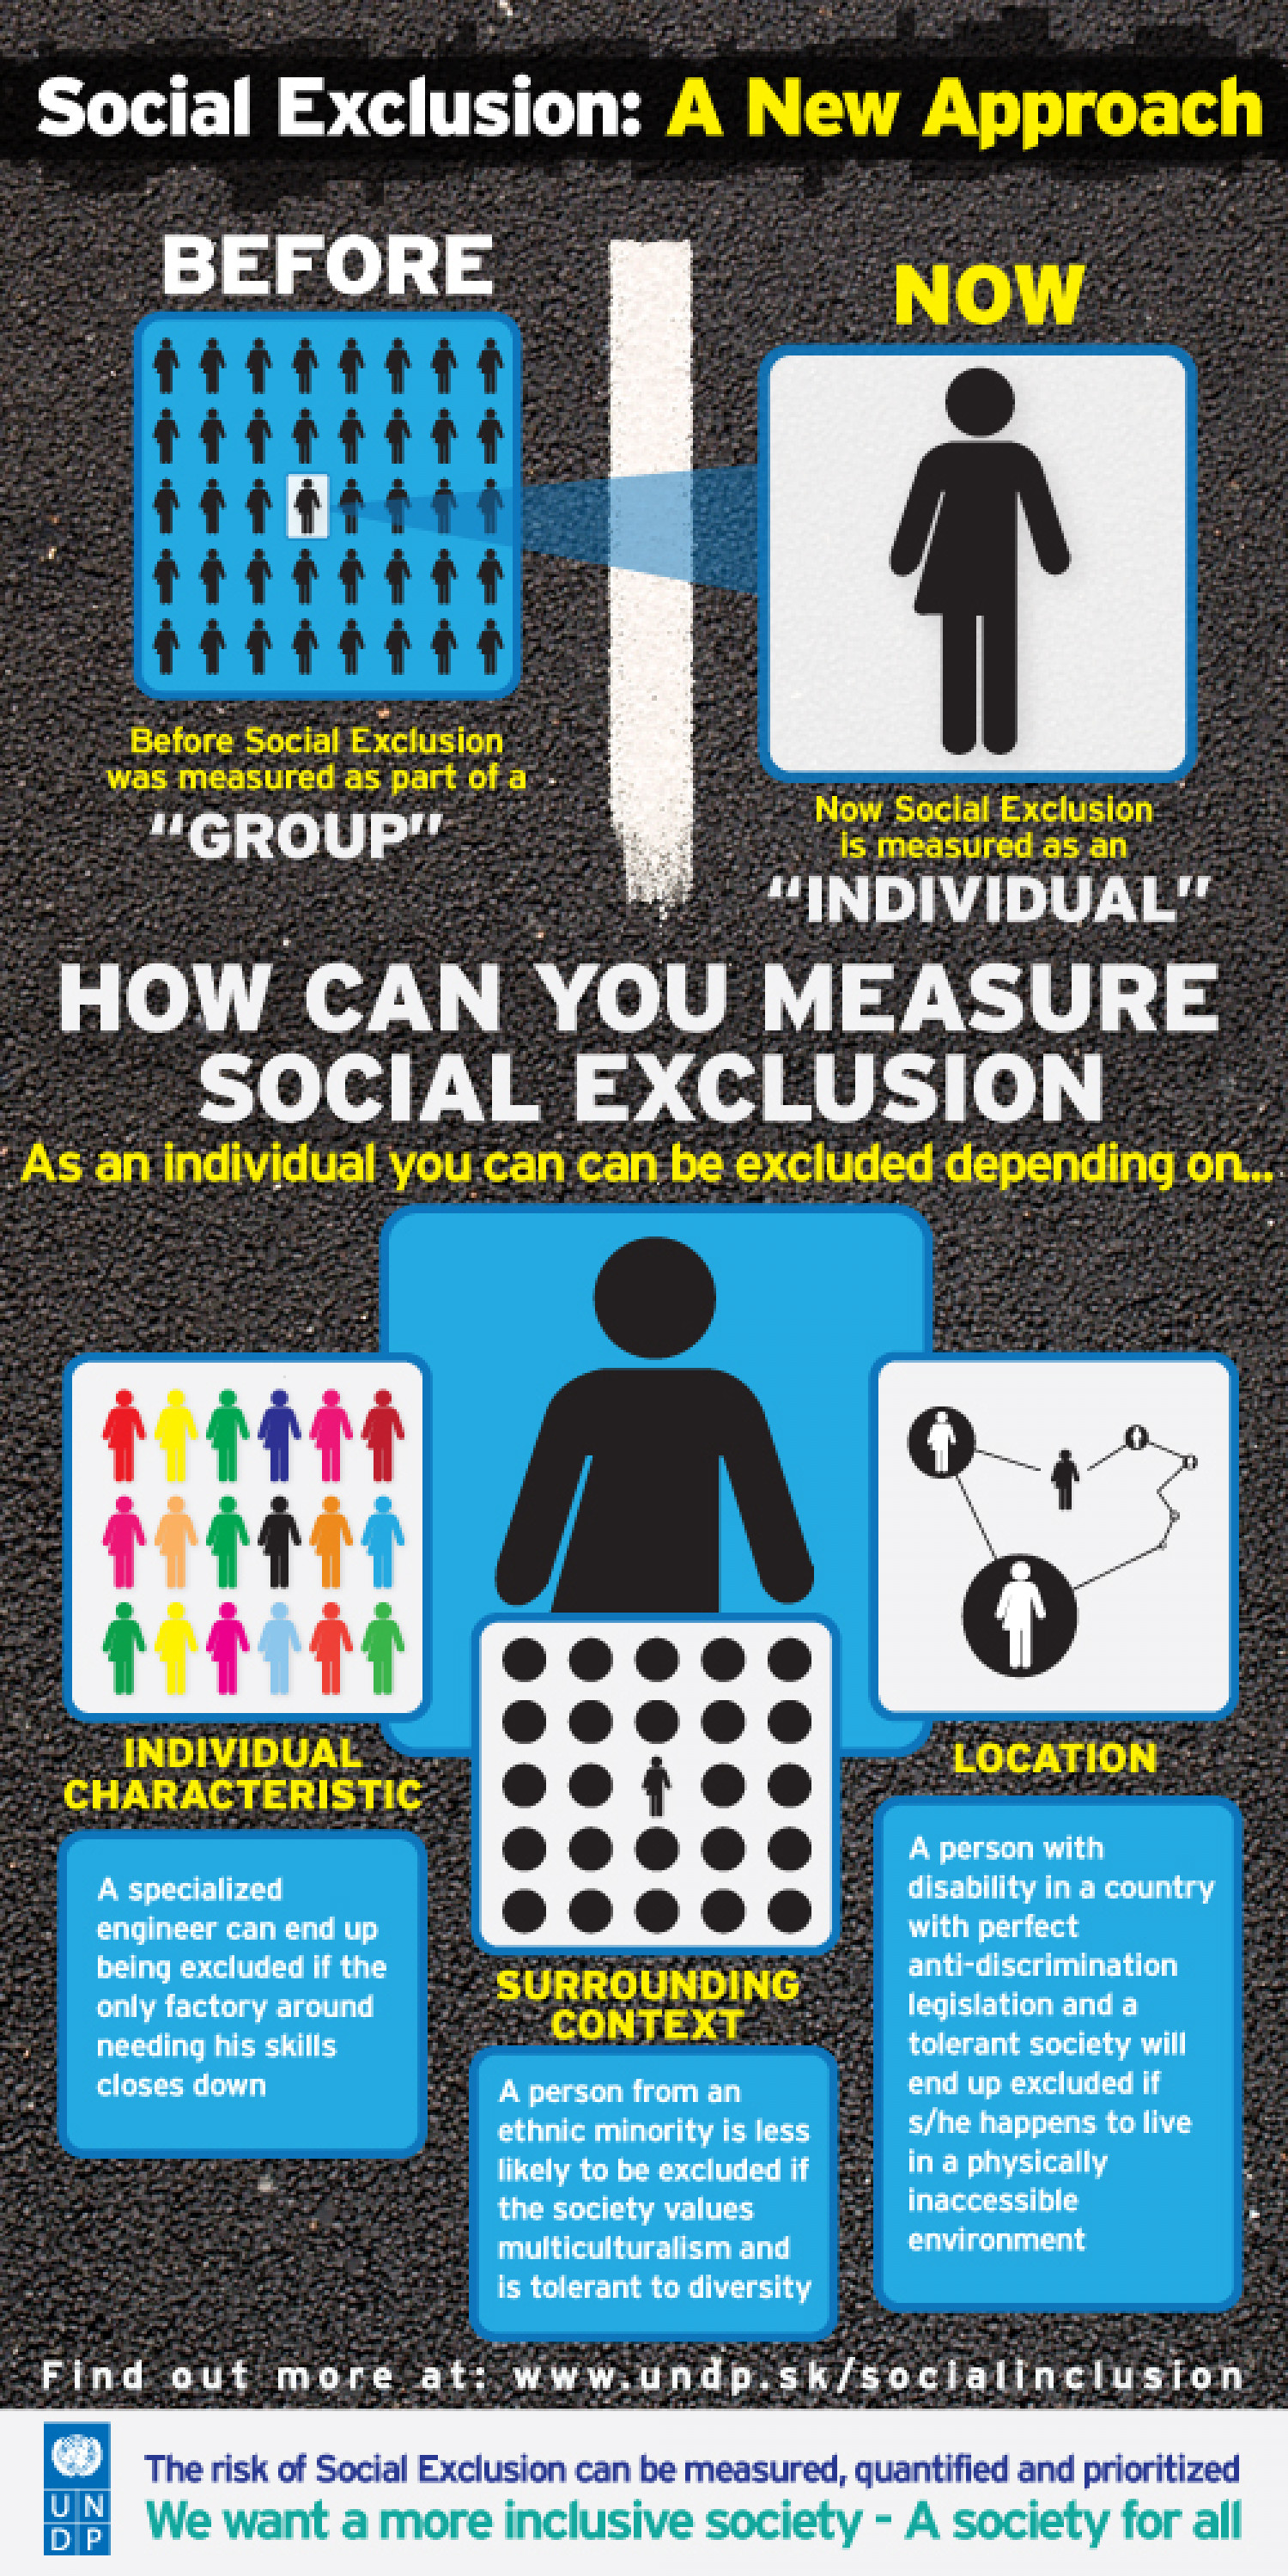 Social Exclusion: A new approach Infographic